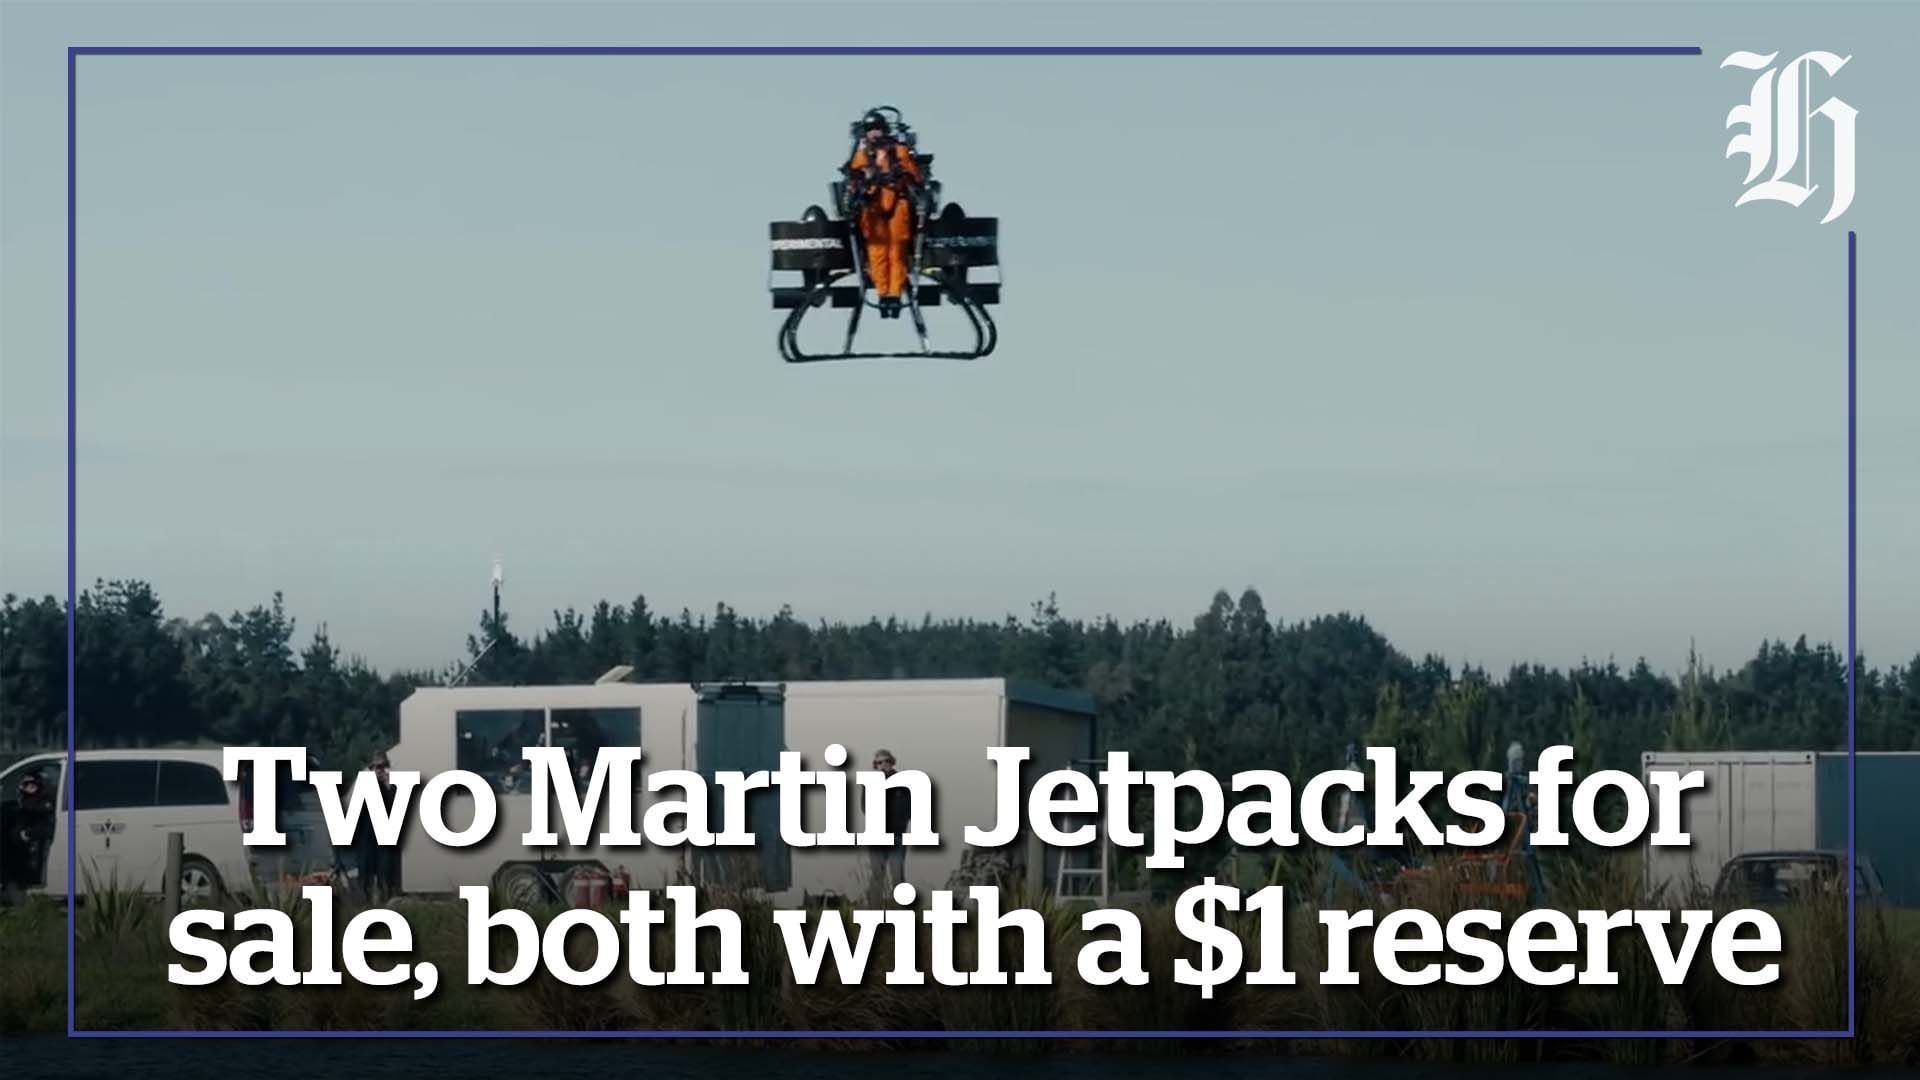 Martin Jetpacks for sale on Trade Me attract plenty of attention - and  criticism